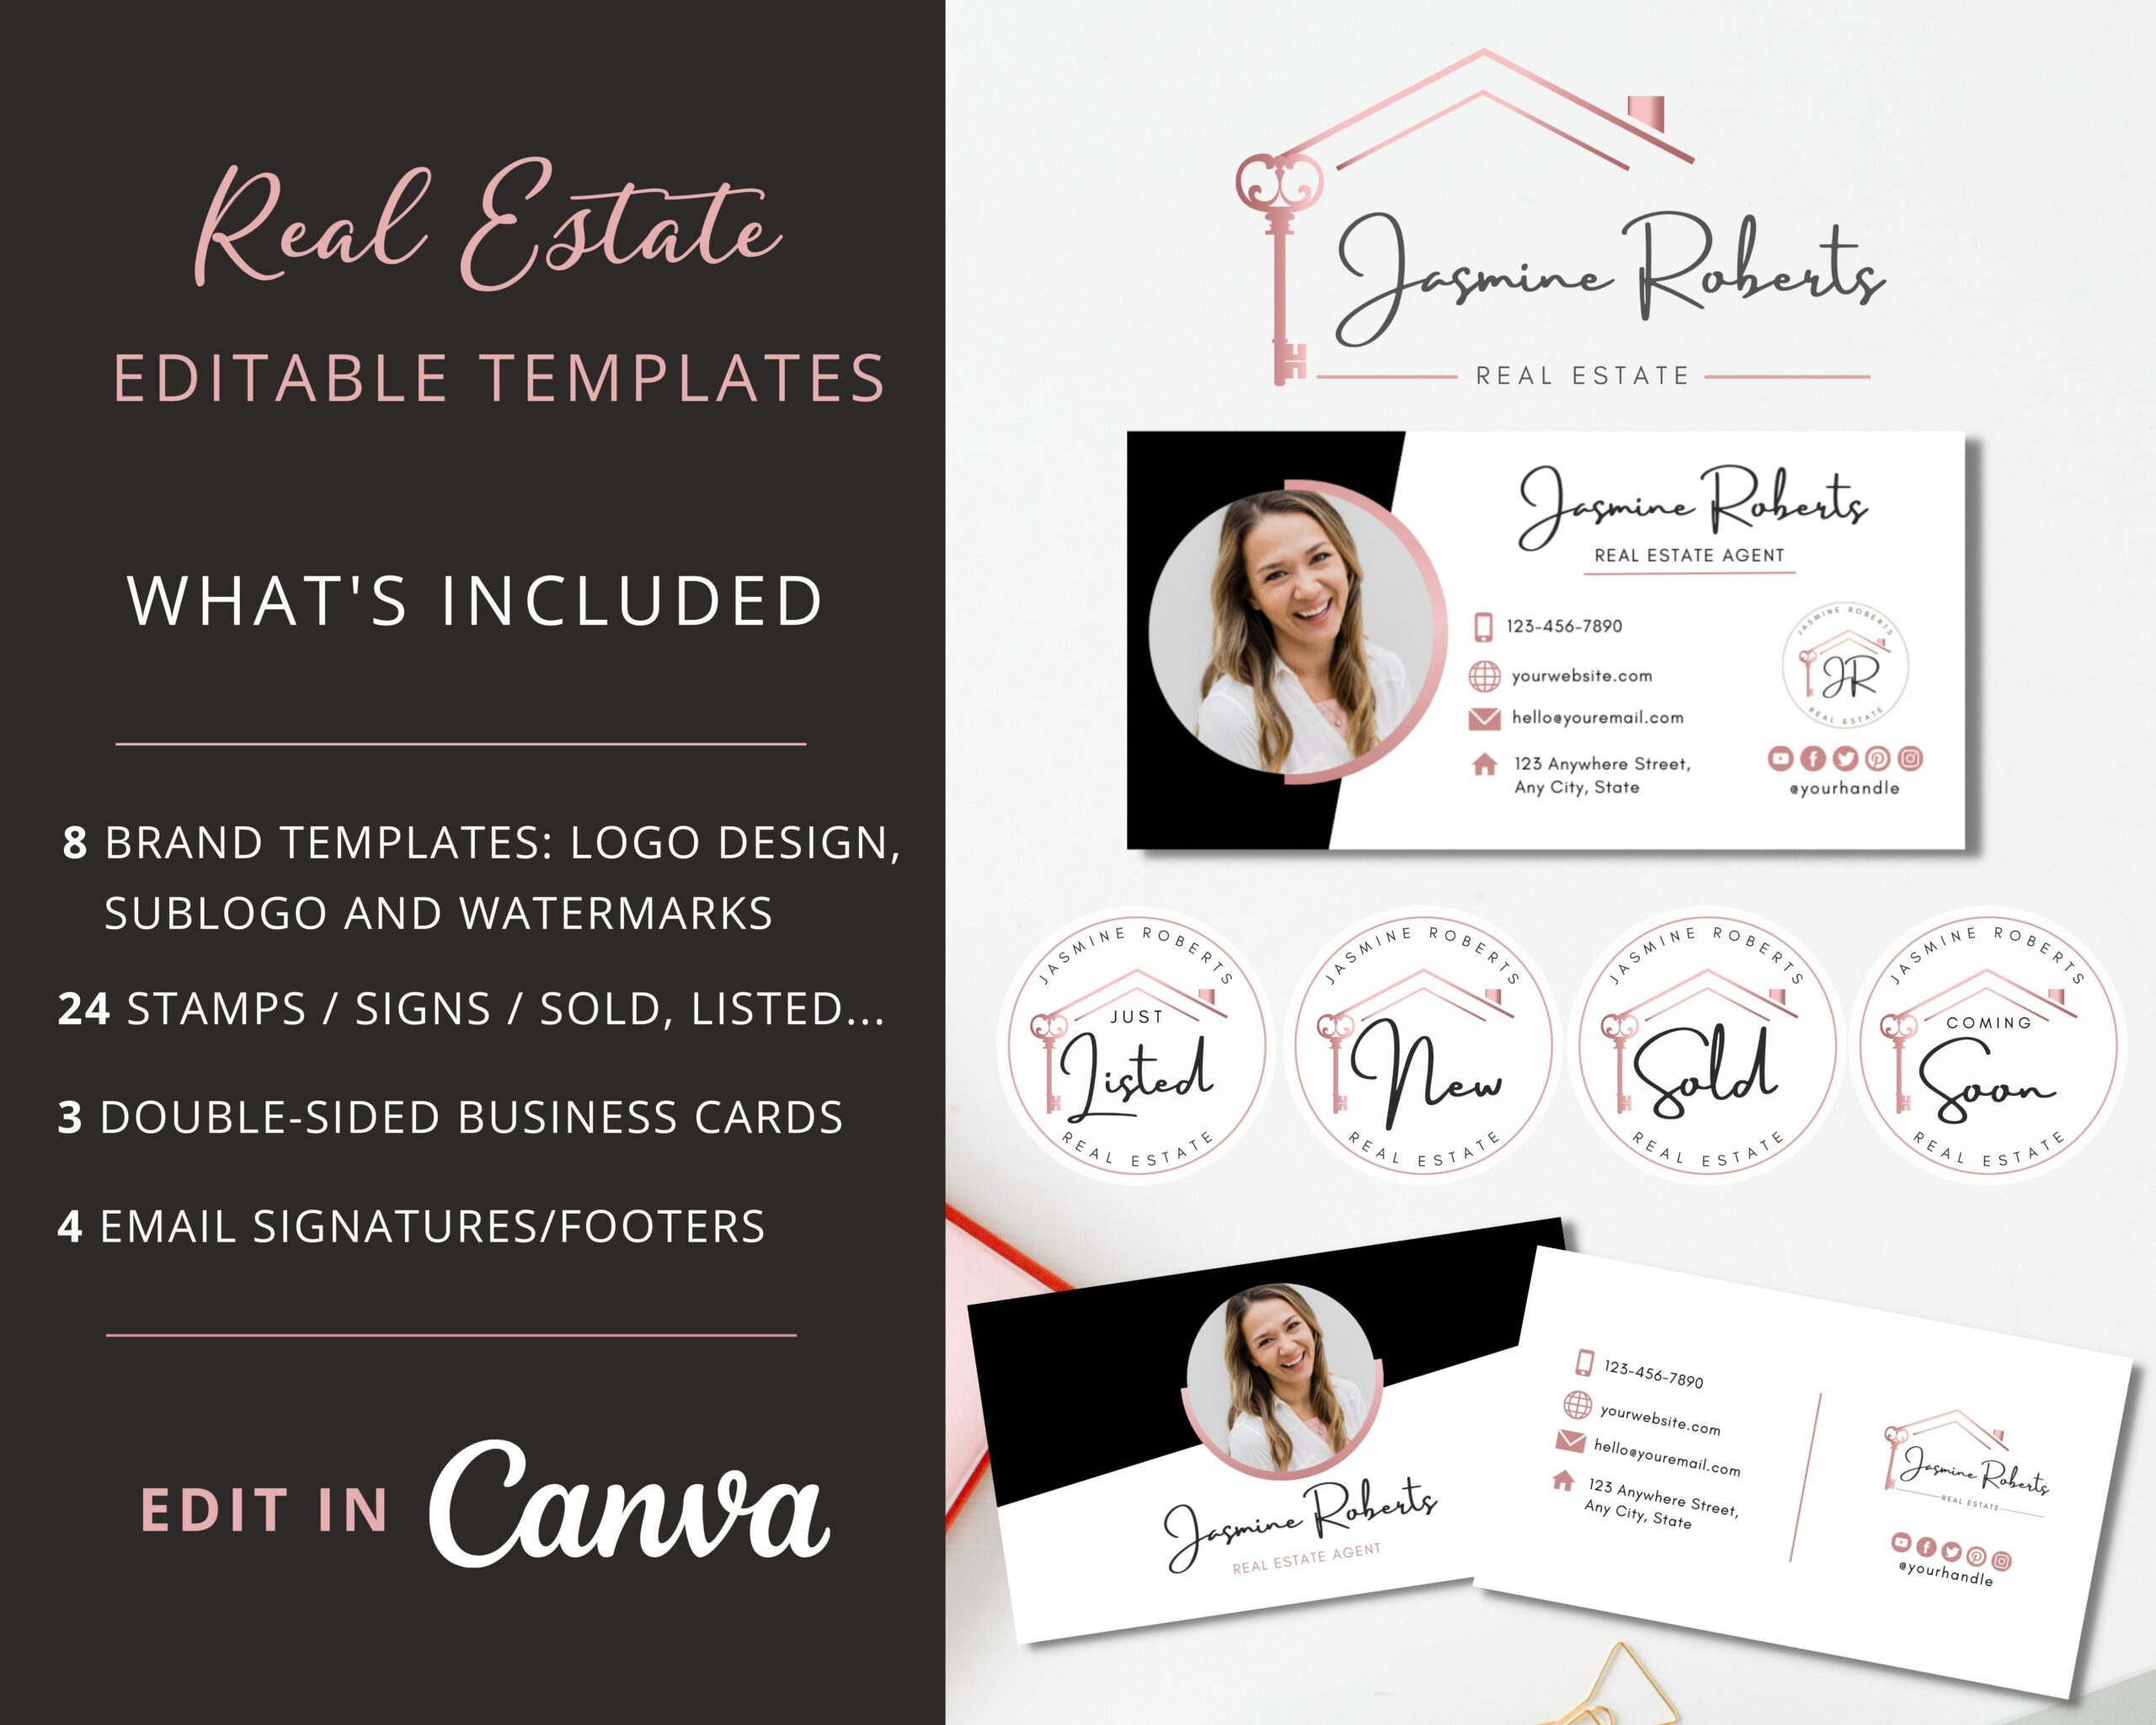 DIY Rose Gold Real Estate Female Agent Branding Kit. Marketing Materials: Logos, Sublogos, Business Cards, Email Signatures, Stamps - Instant Access